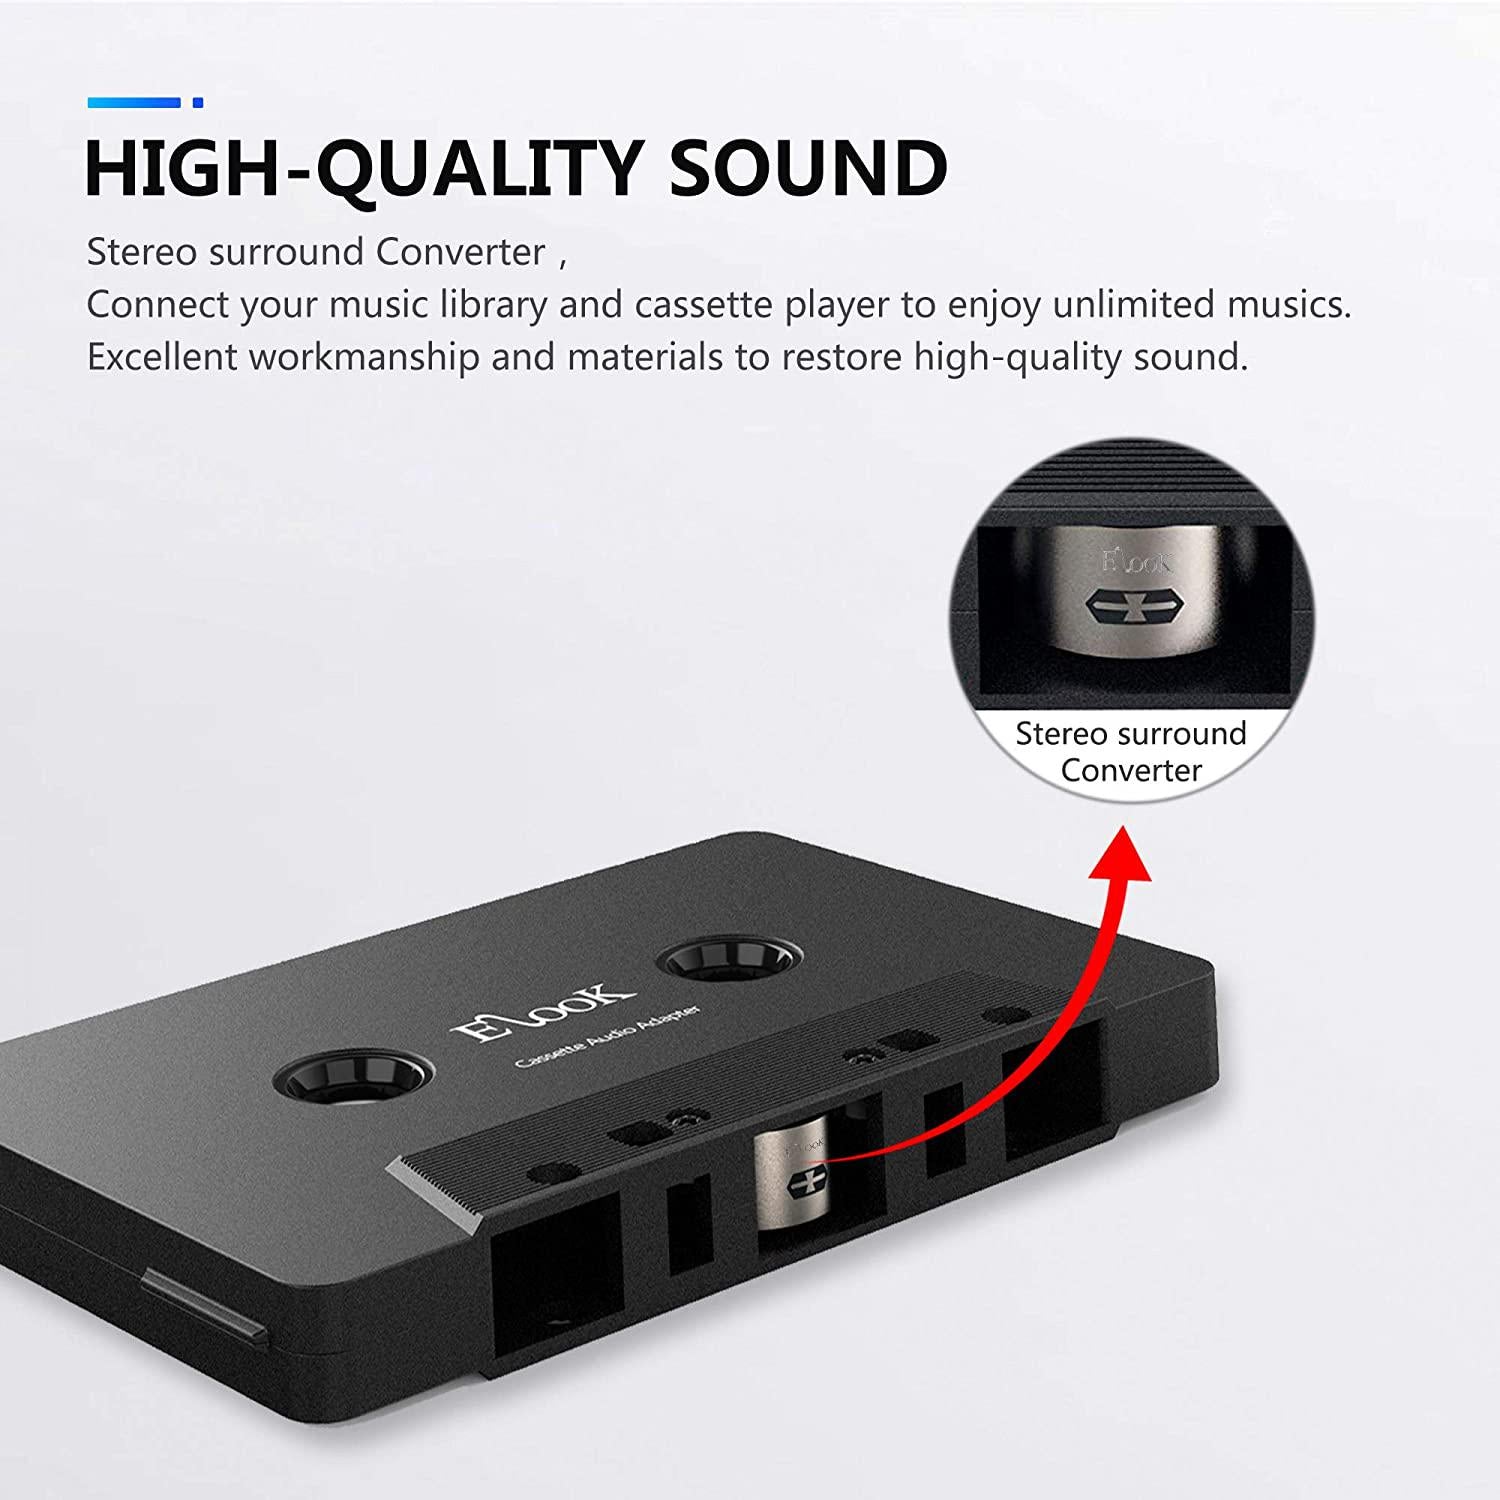 Elook, Elook Car Cassette Aux Adapter, 3.5mm Universal Audio Cable Tape Adapter for Car, Phone, MP3 ect. Black